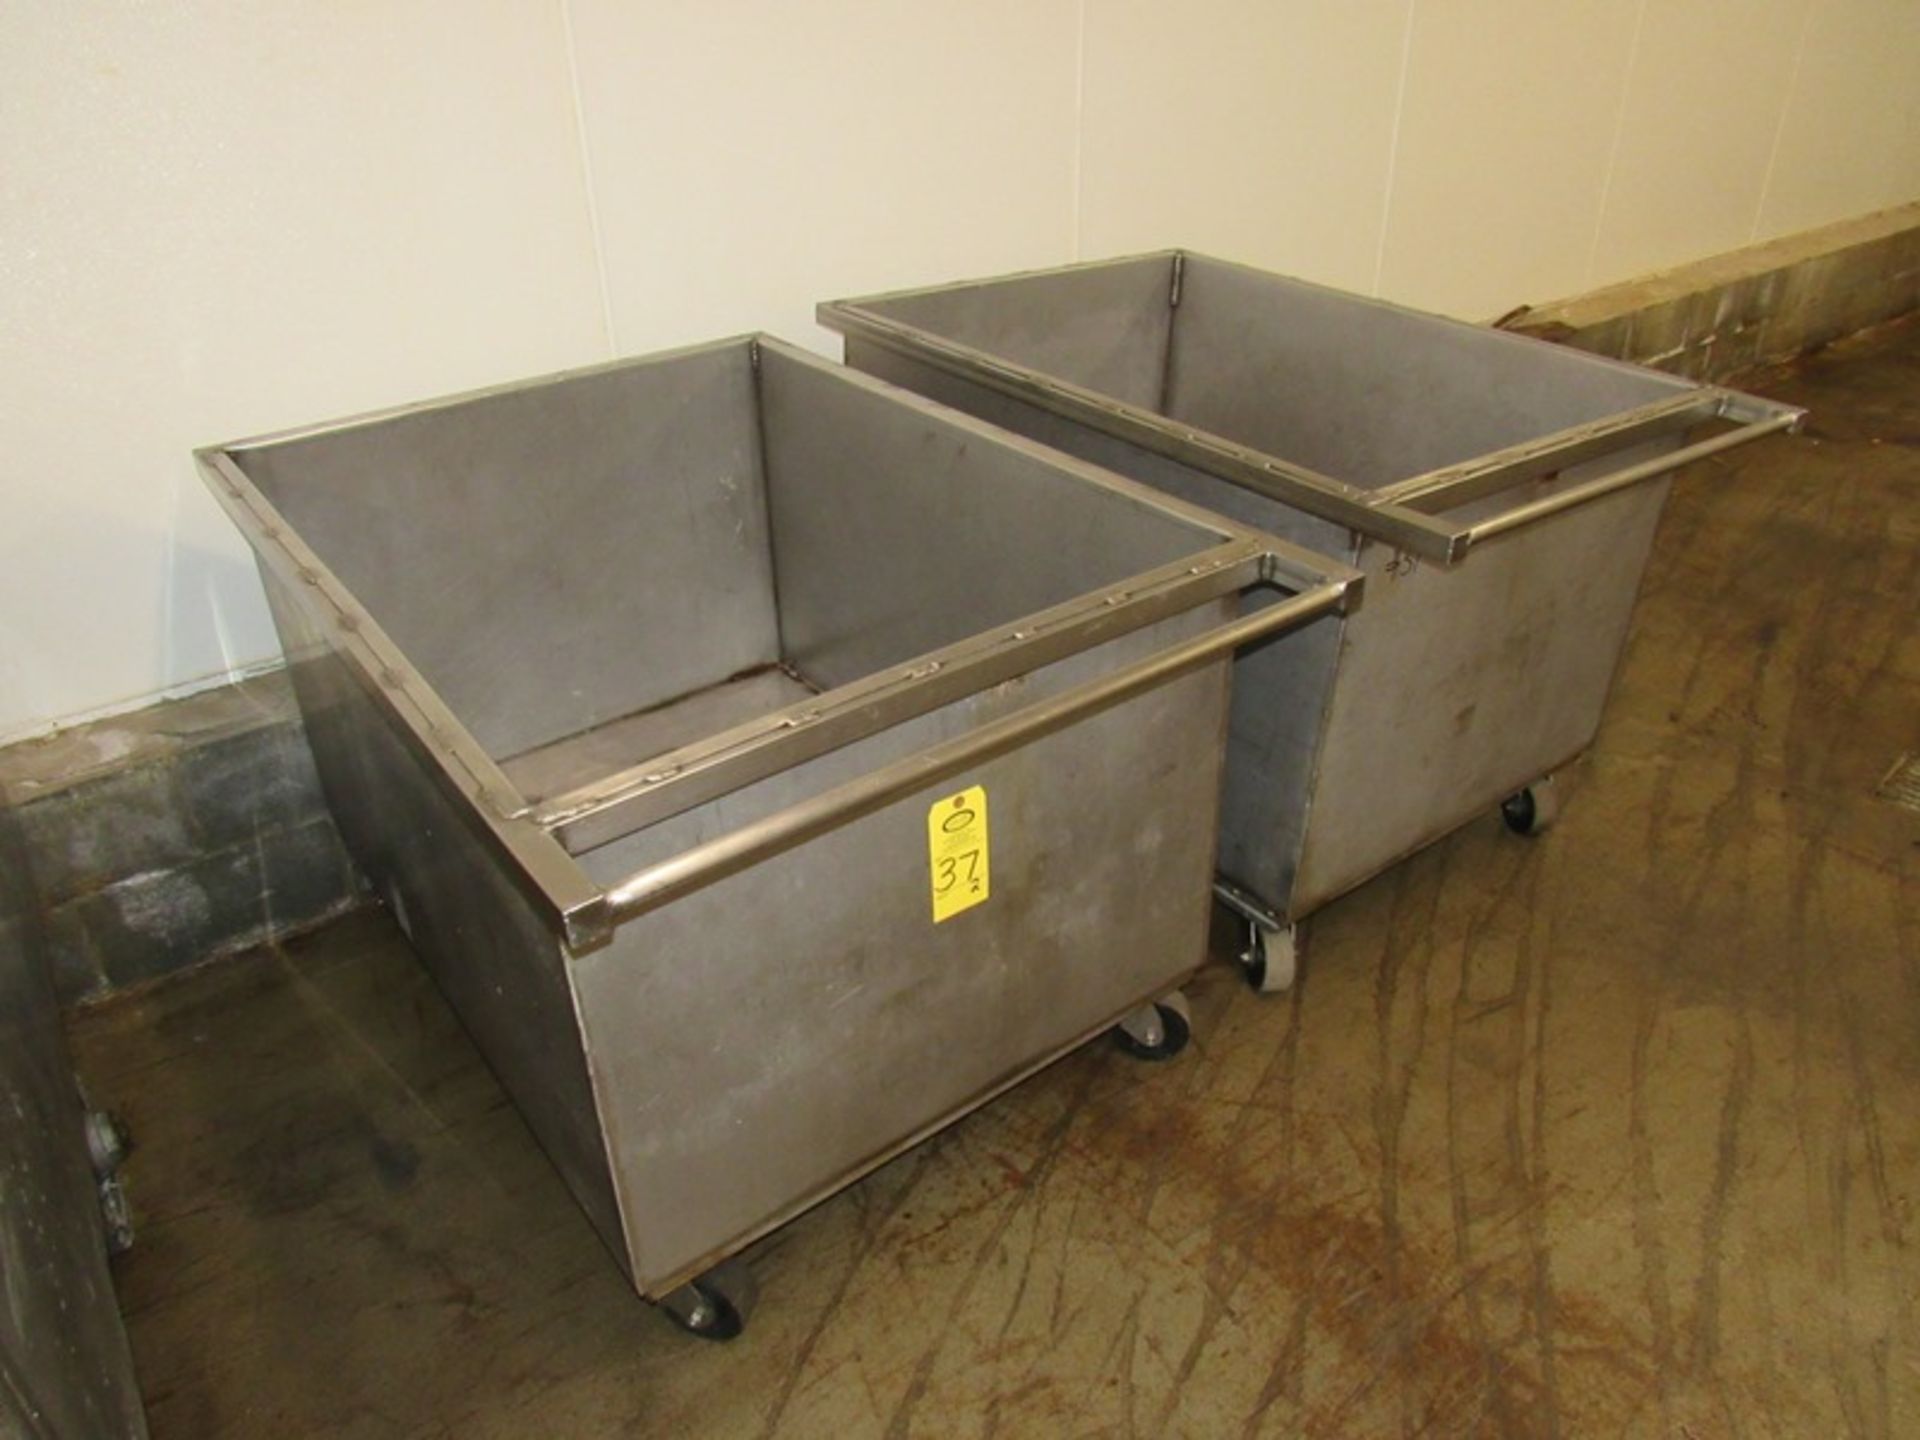 Stainless Steel Portable Vats, 36" W X 48" L X 26" D (All Funds Must Be Received by Friday, August 9